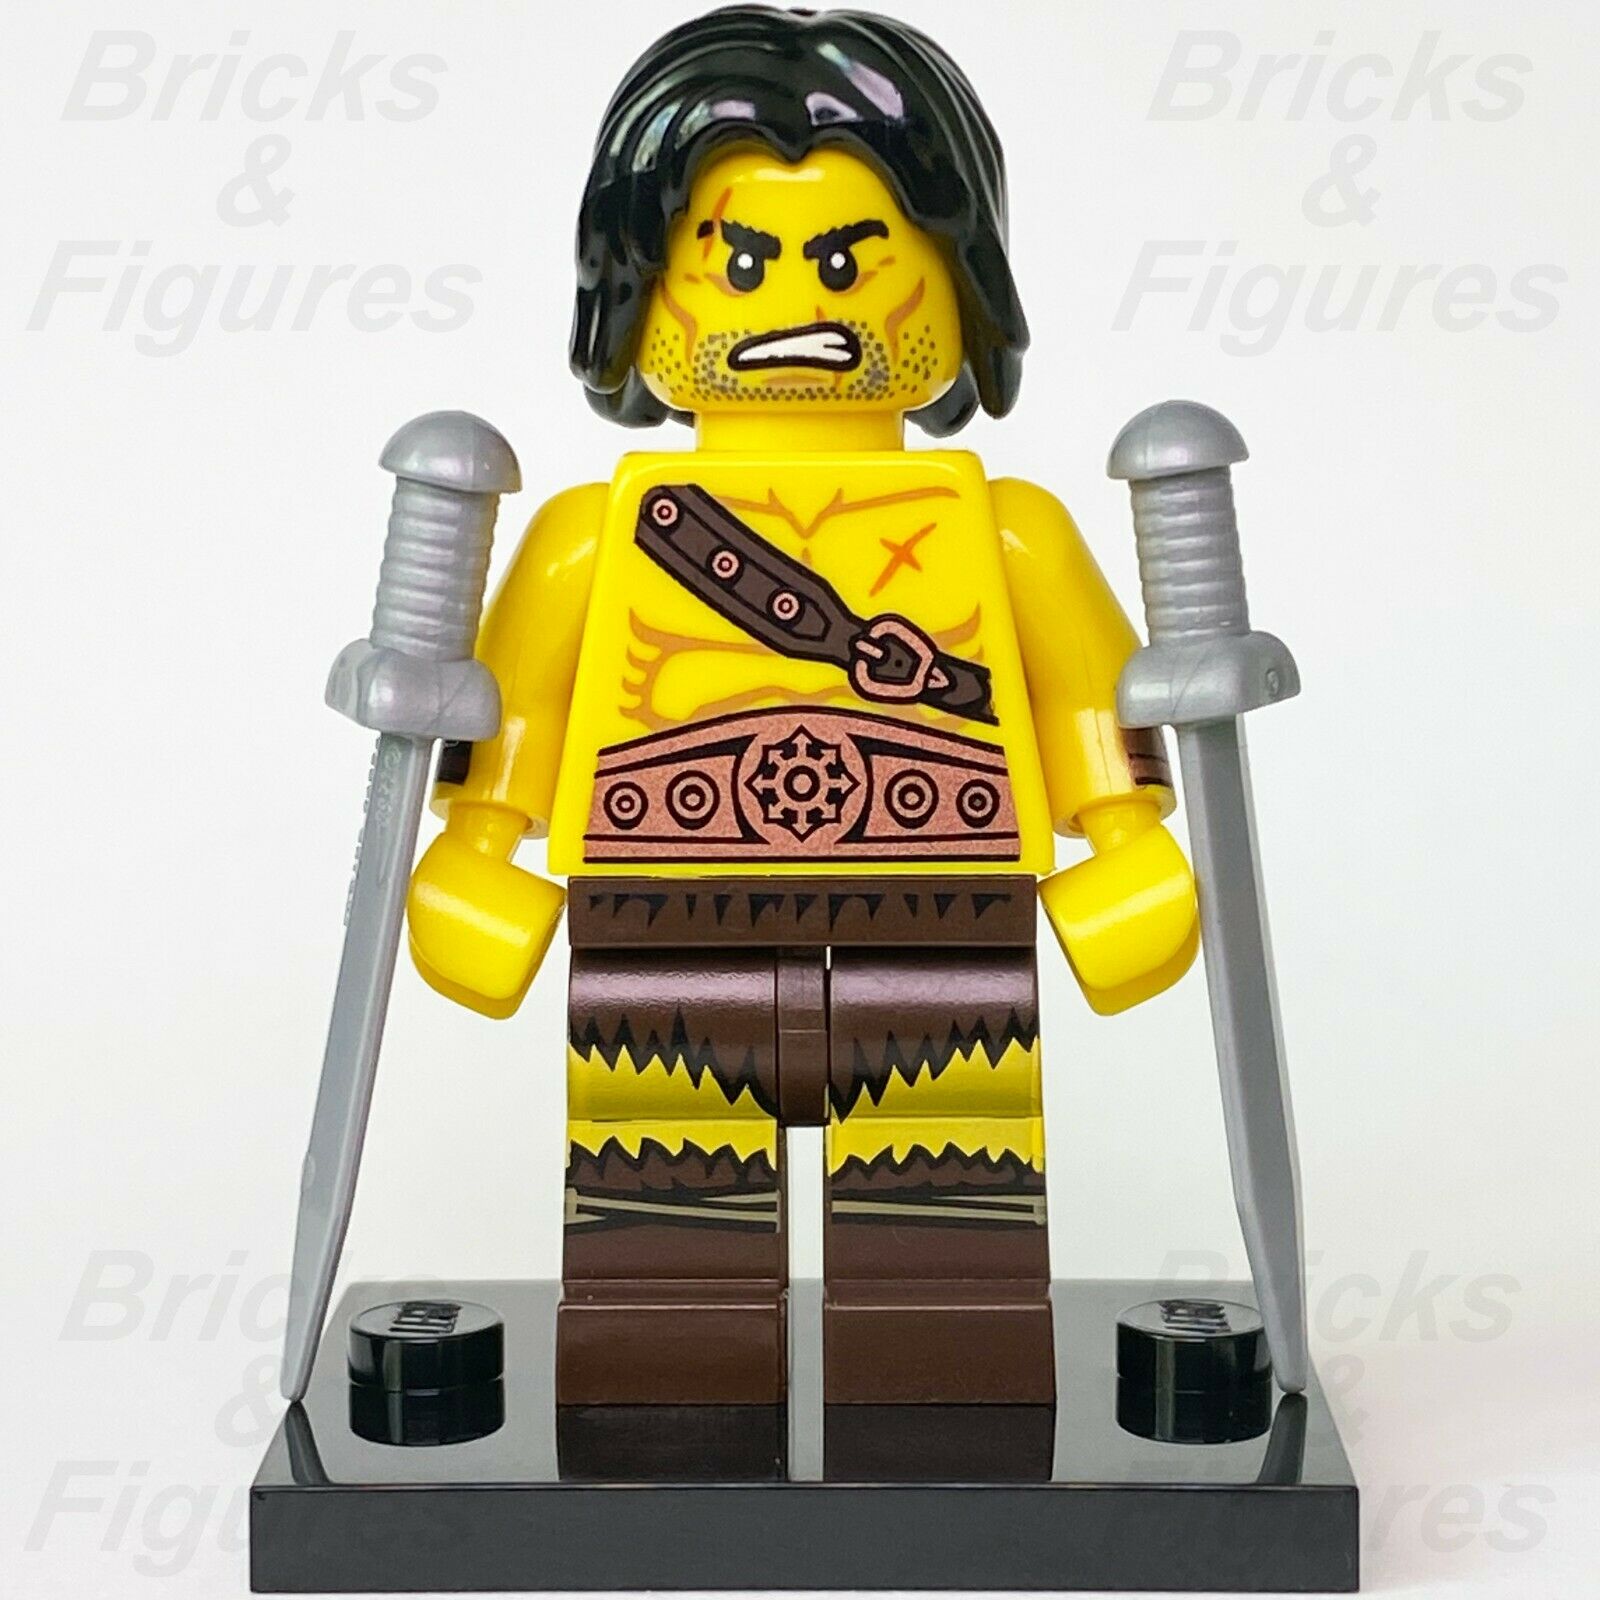 New Collectible Minifigures LEGO Barbarian Series 11 Minifig from polybag 71002 - Bricks & Figures